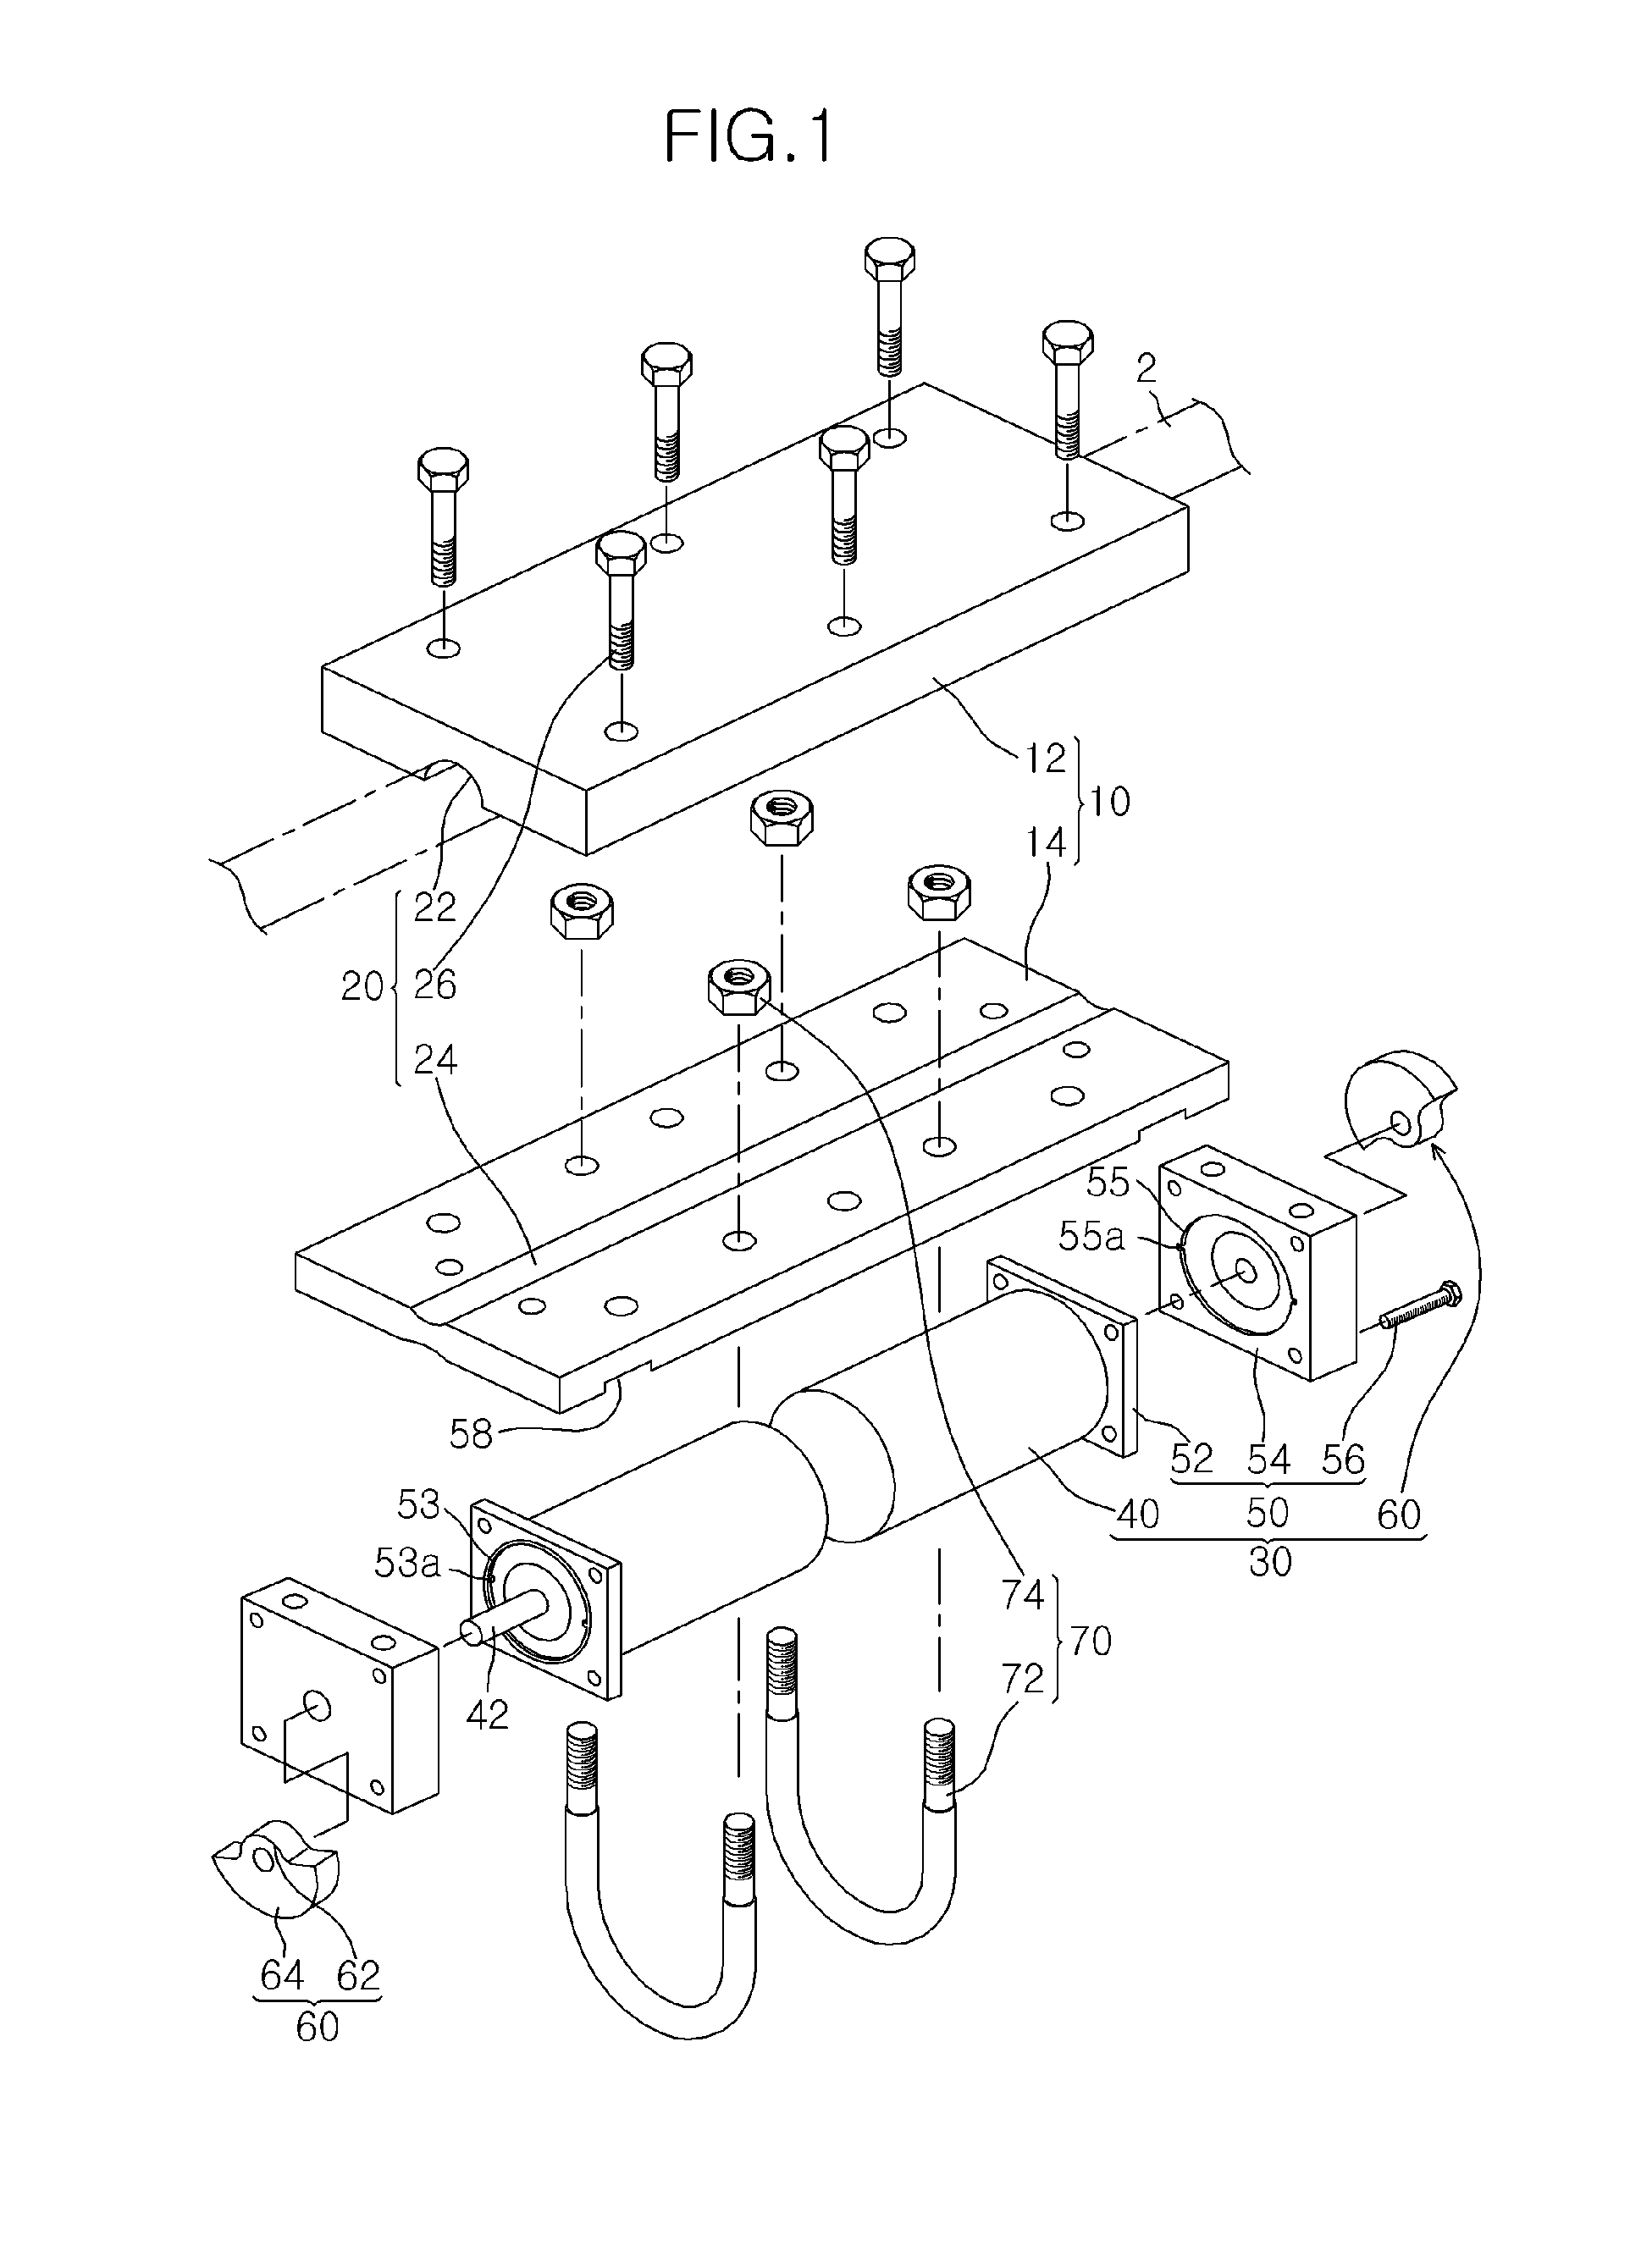 Device for removing ice and snow from power transmission line